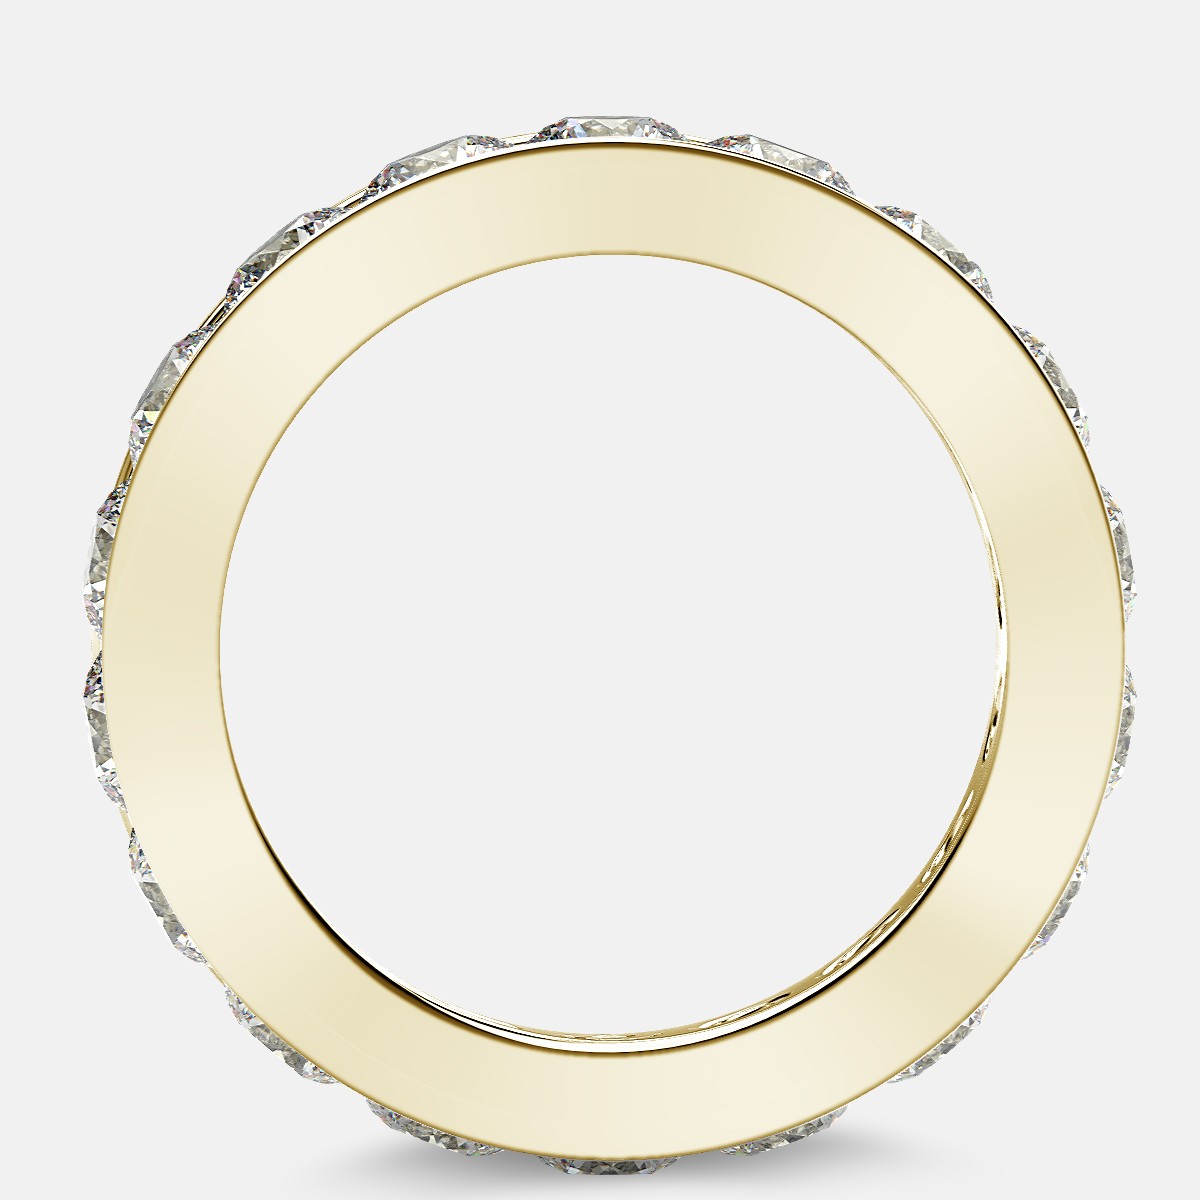 Channel Set Eternity Ring with Round Diamonds in 18k Yellow Gold